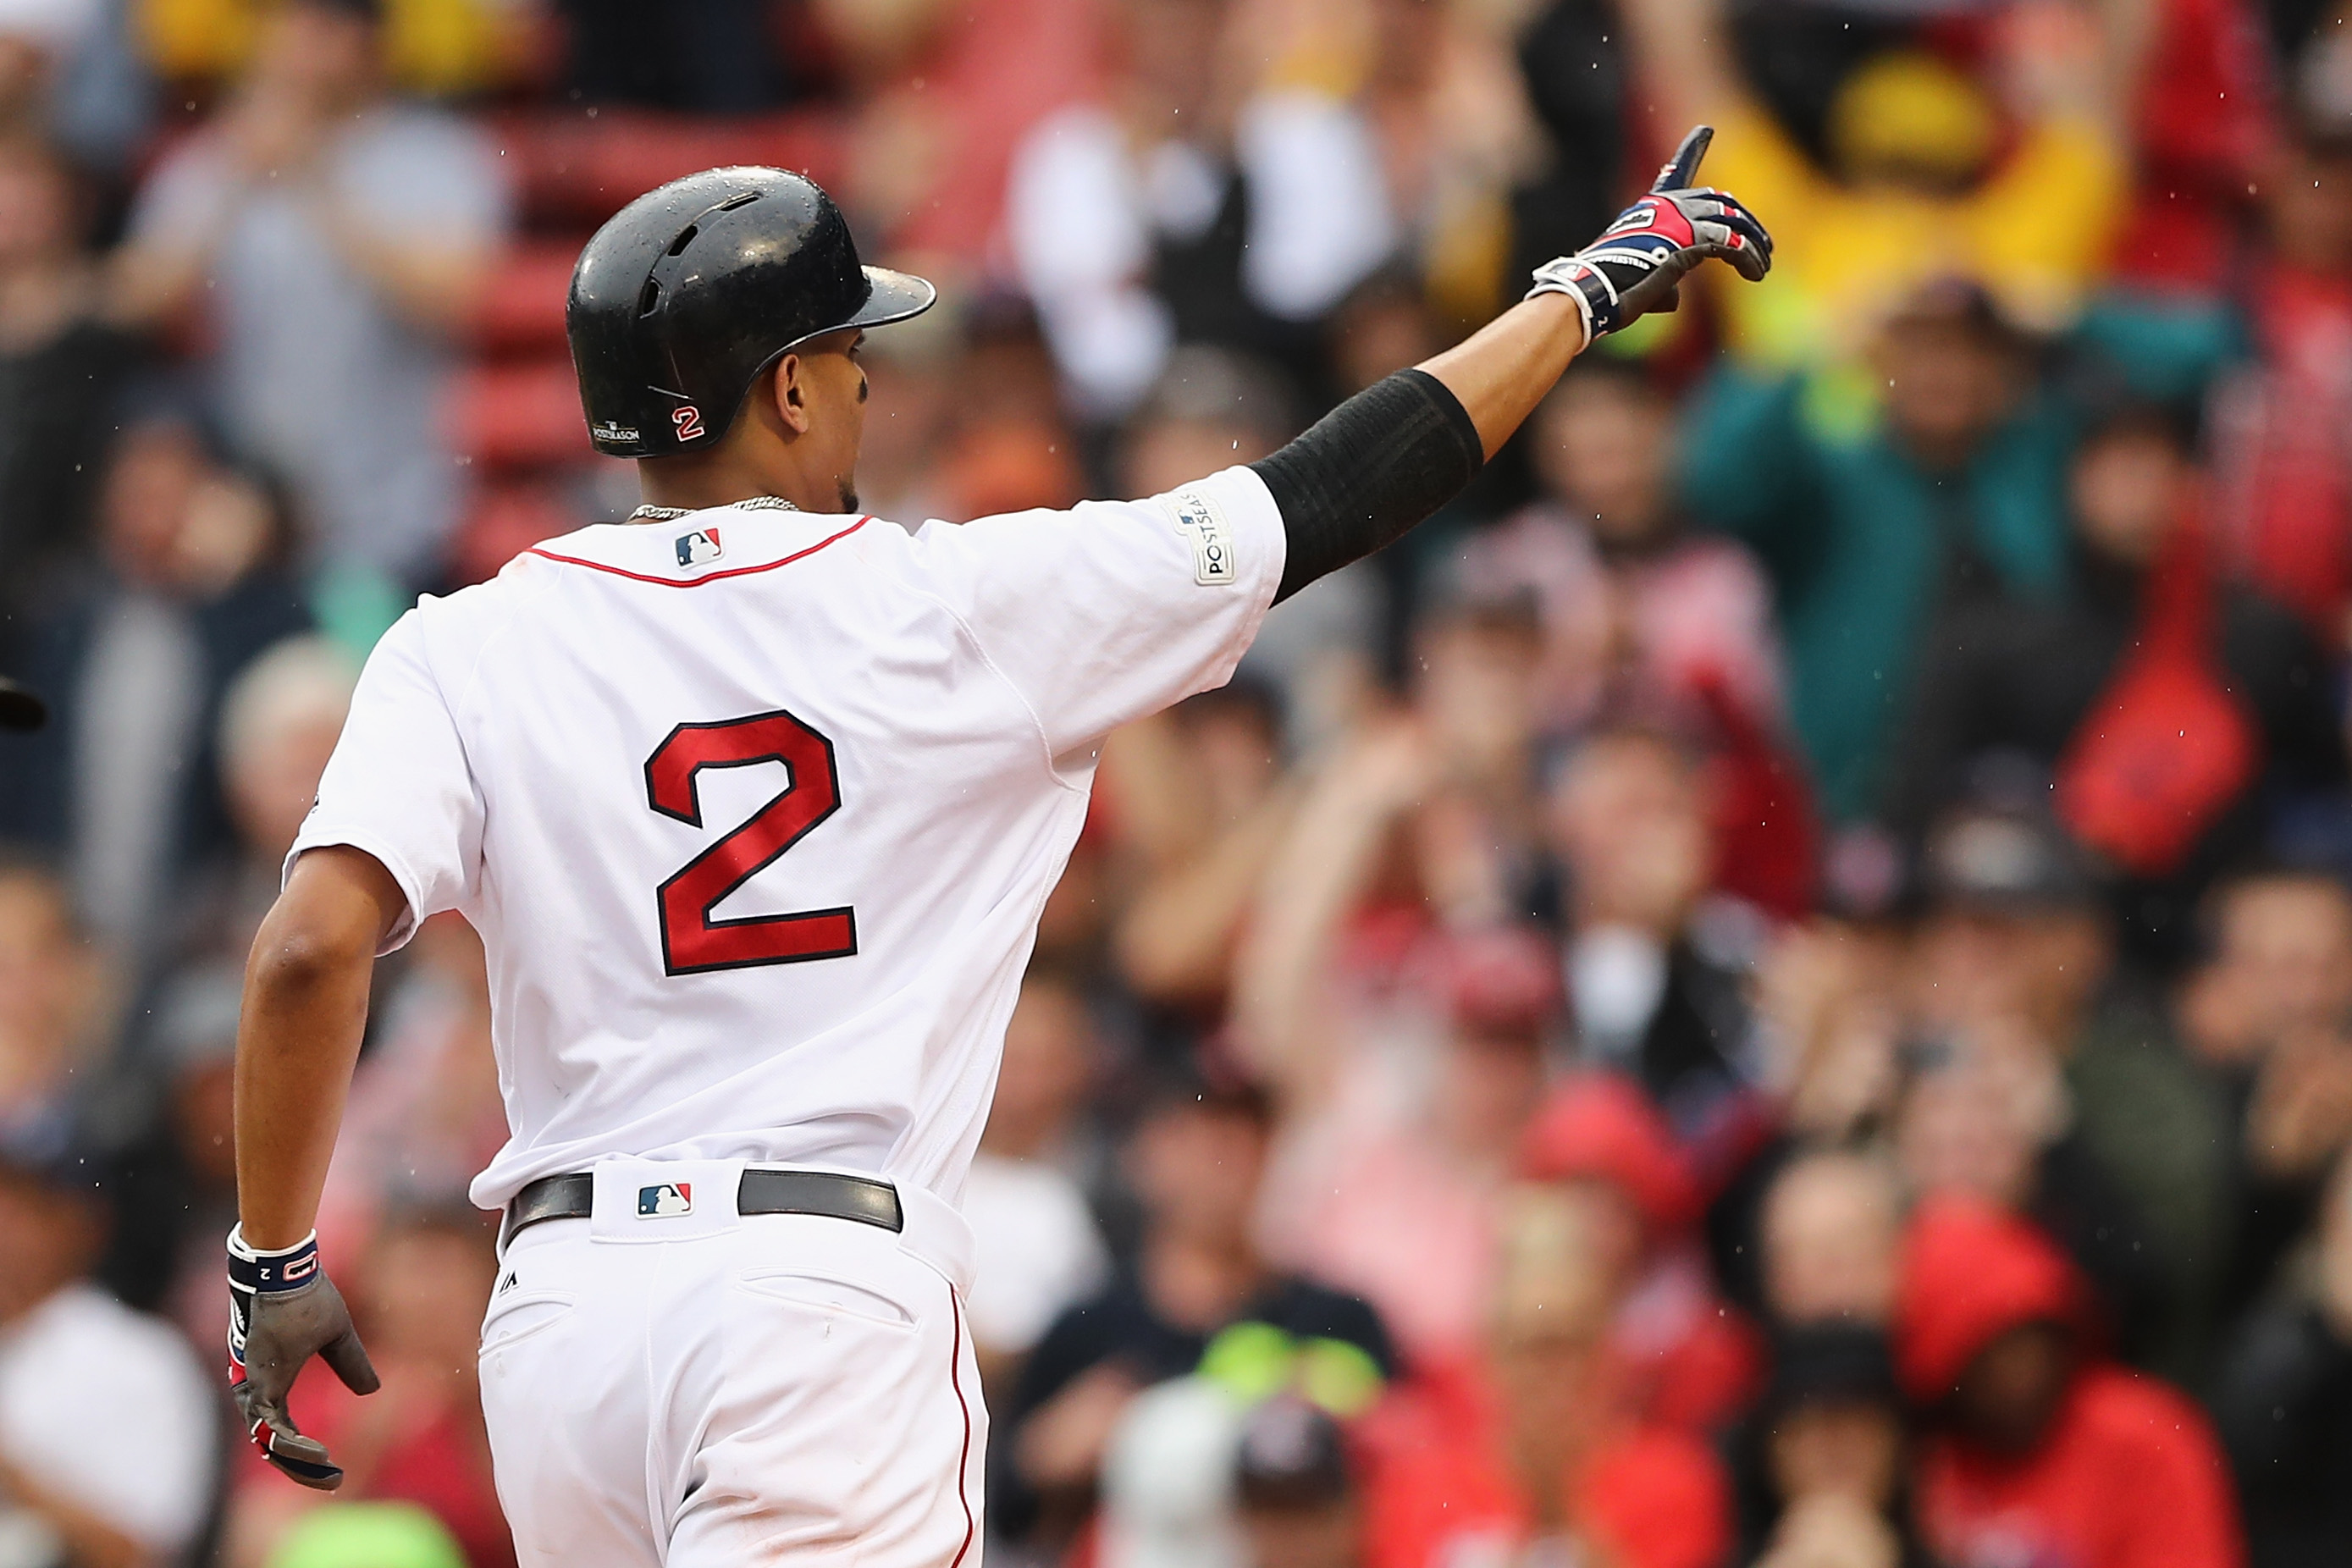 Boston Red Sox: Have We Seen the Last of Xander Bogaerts in Boston?